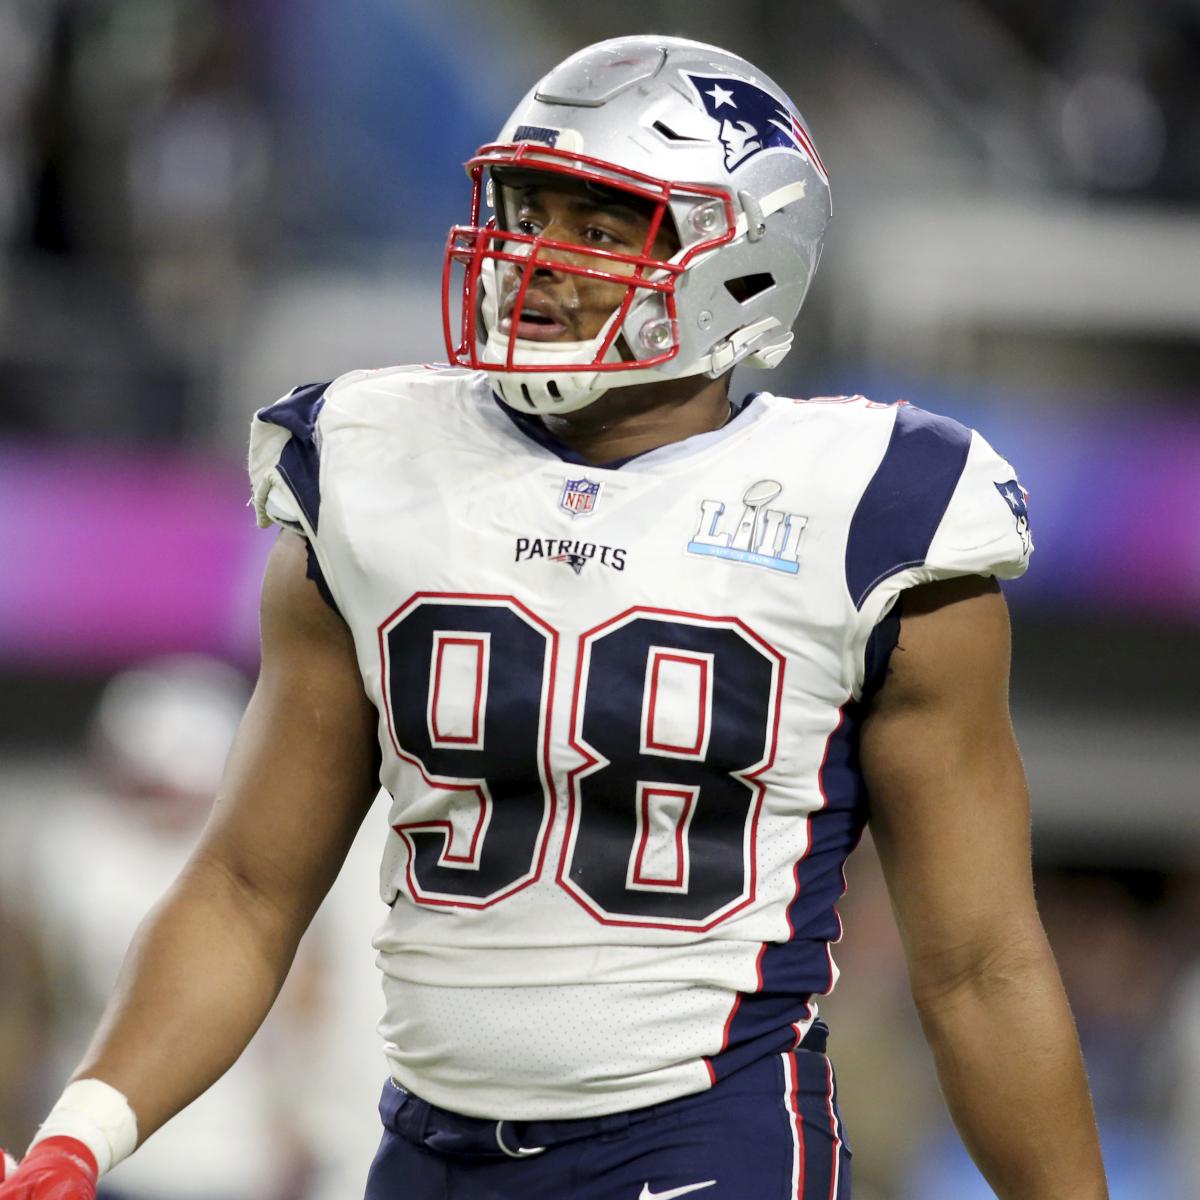 NFL Free Agency 2019 Predictions for Top Players Based on Latest